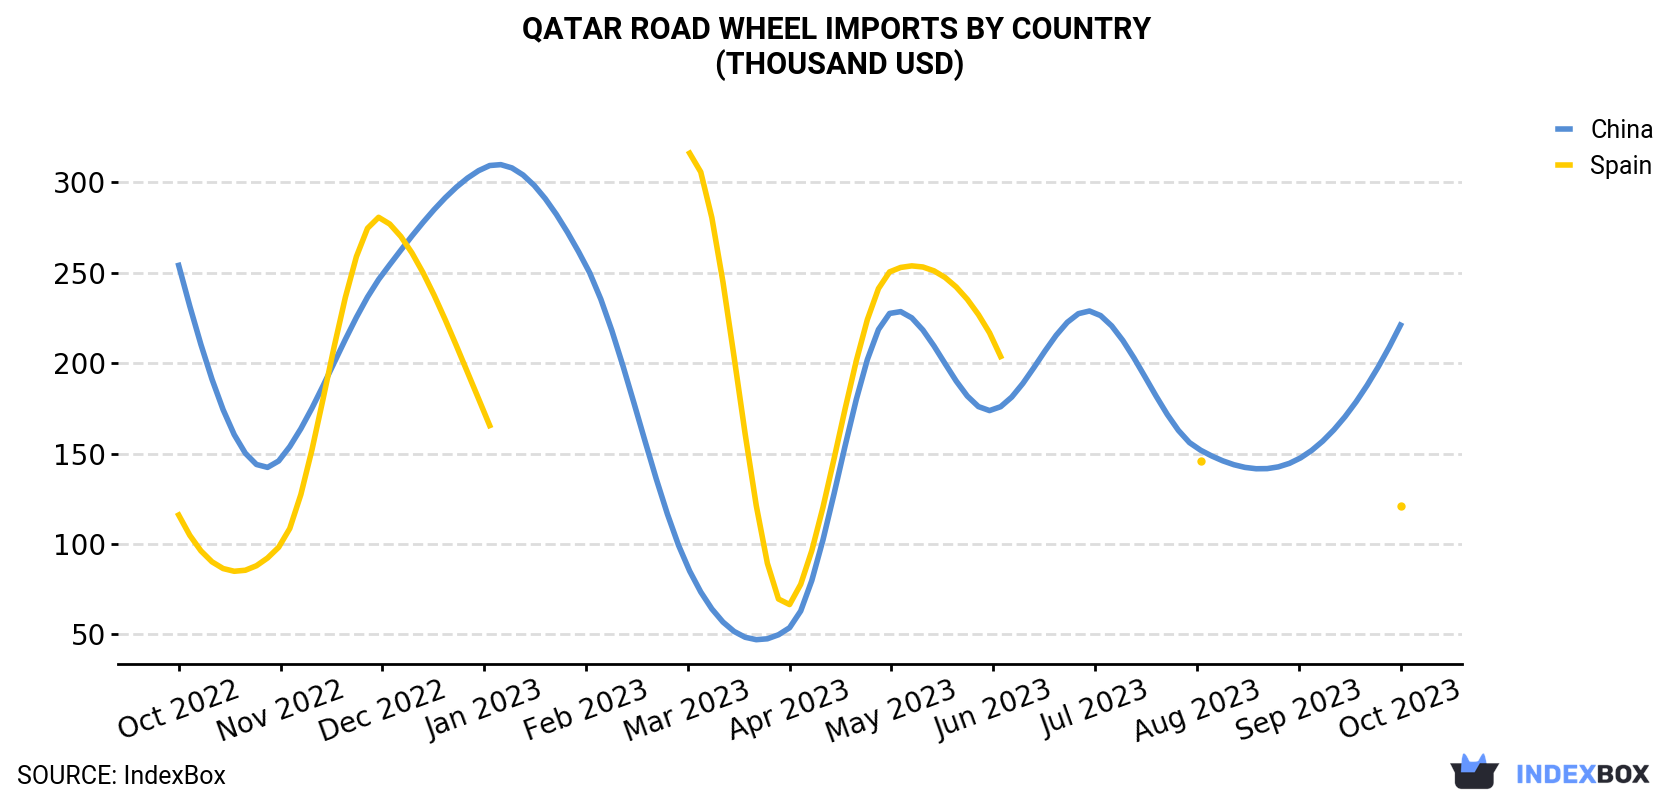 Qatar Road Wheel Imports By Country (Thousand USD)